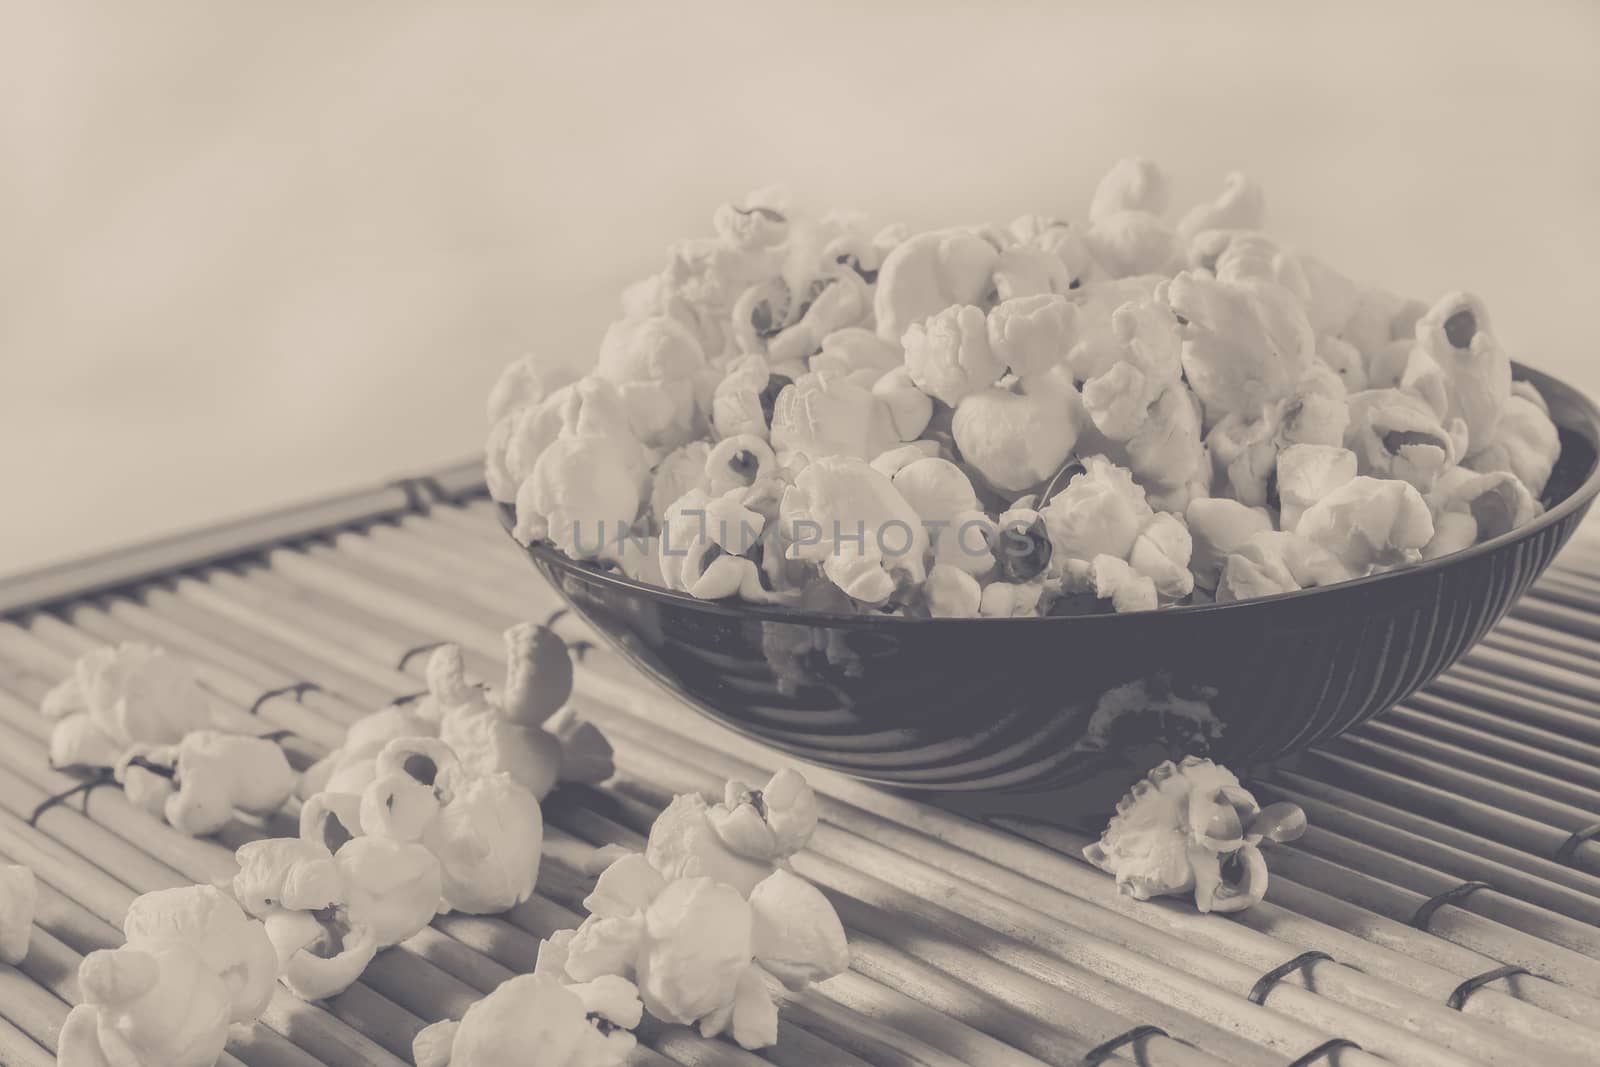 popcorn over filled in bowl and some corn on floor, vintage edited